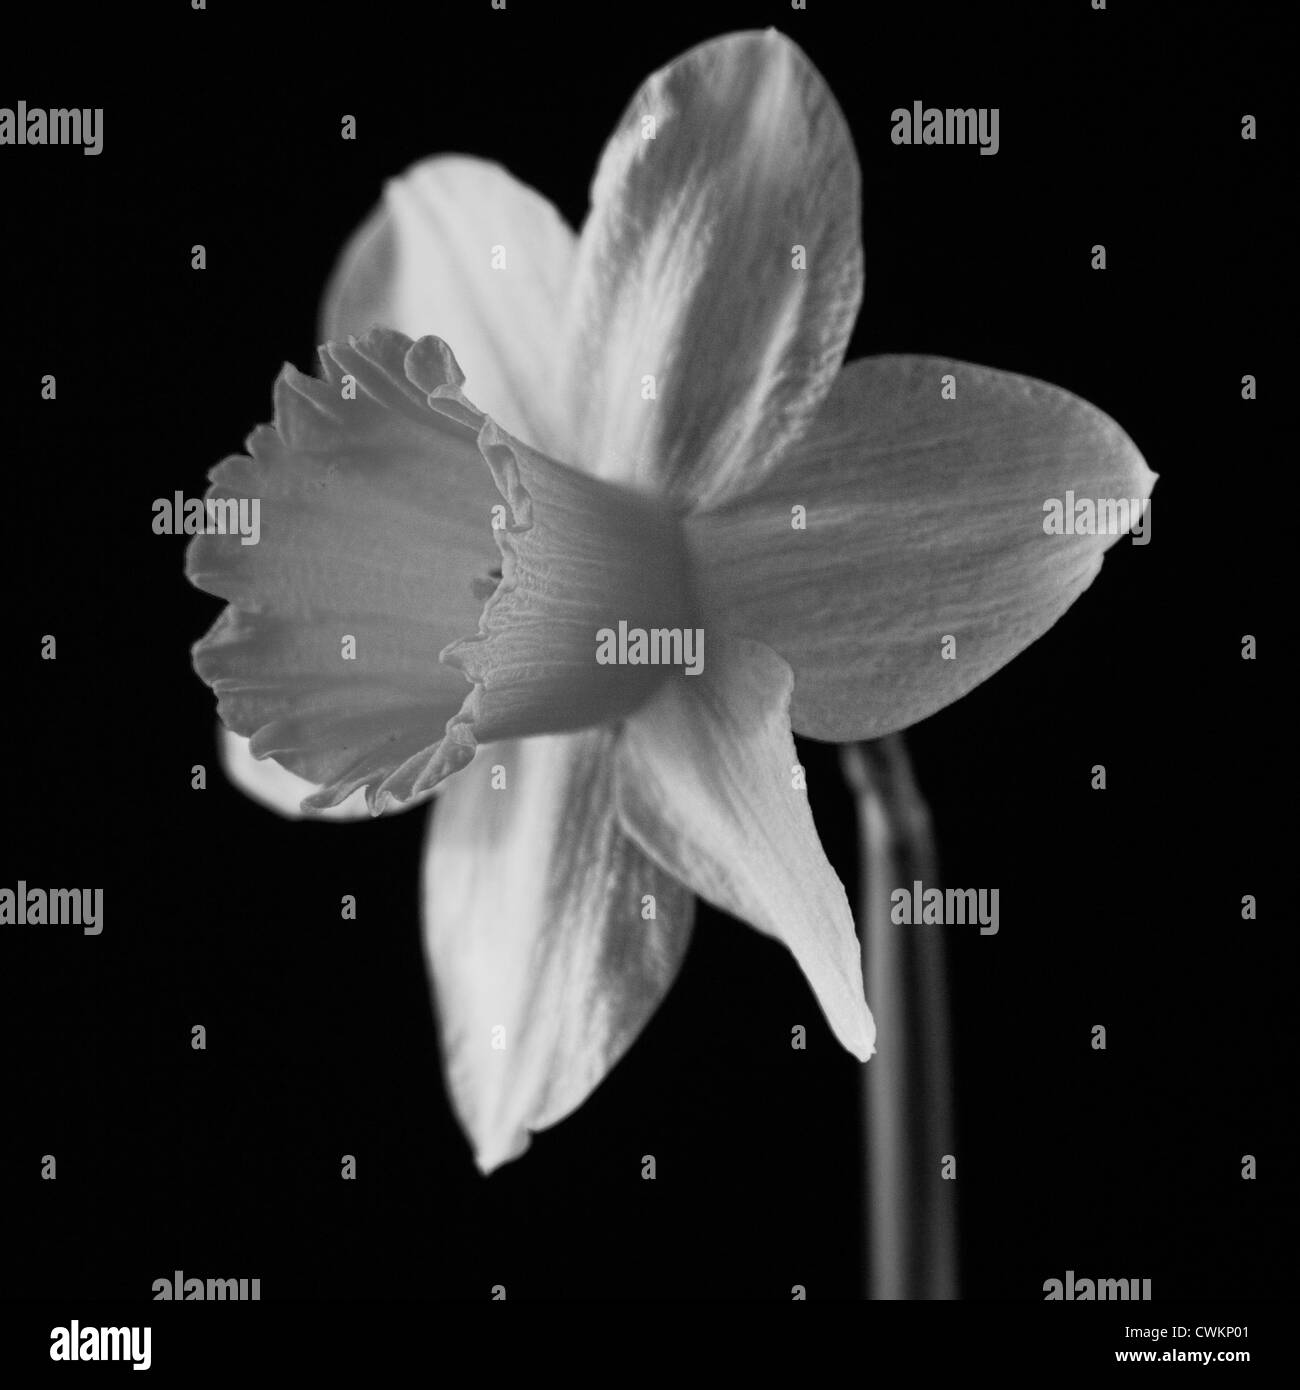 Narcissus close up in black and white Stock Photo